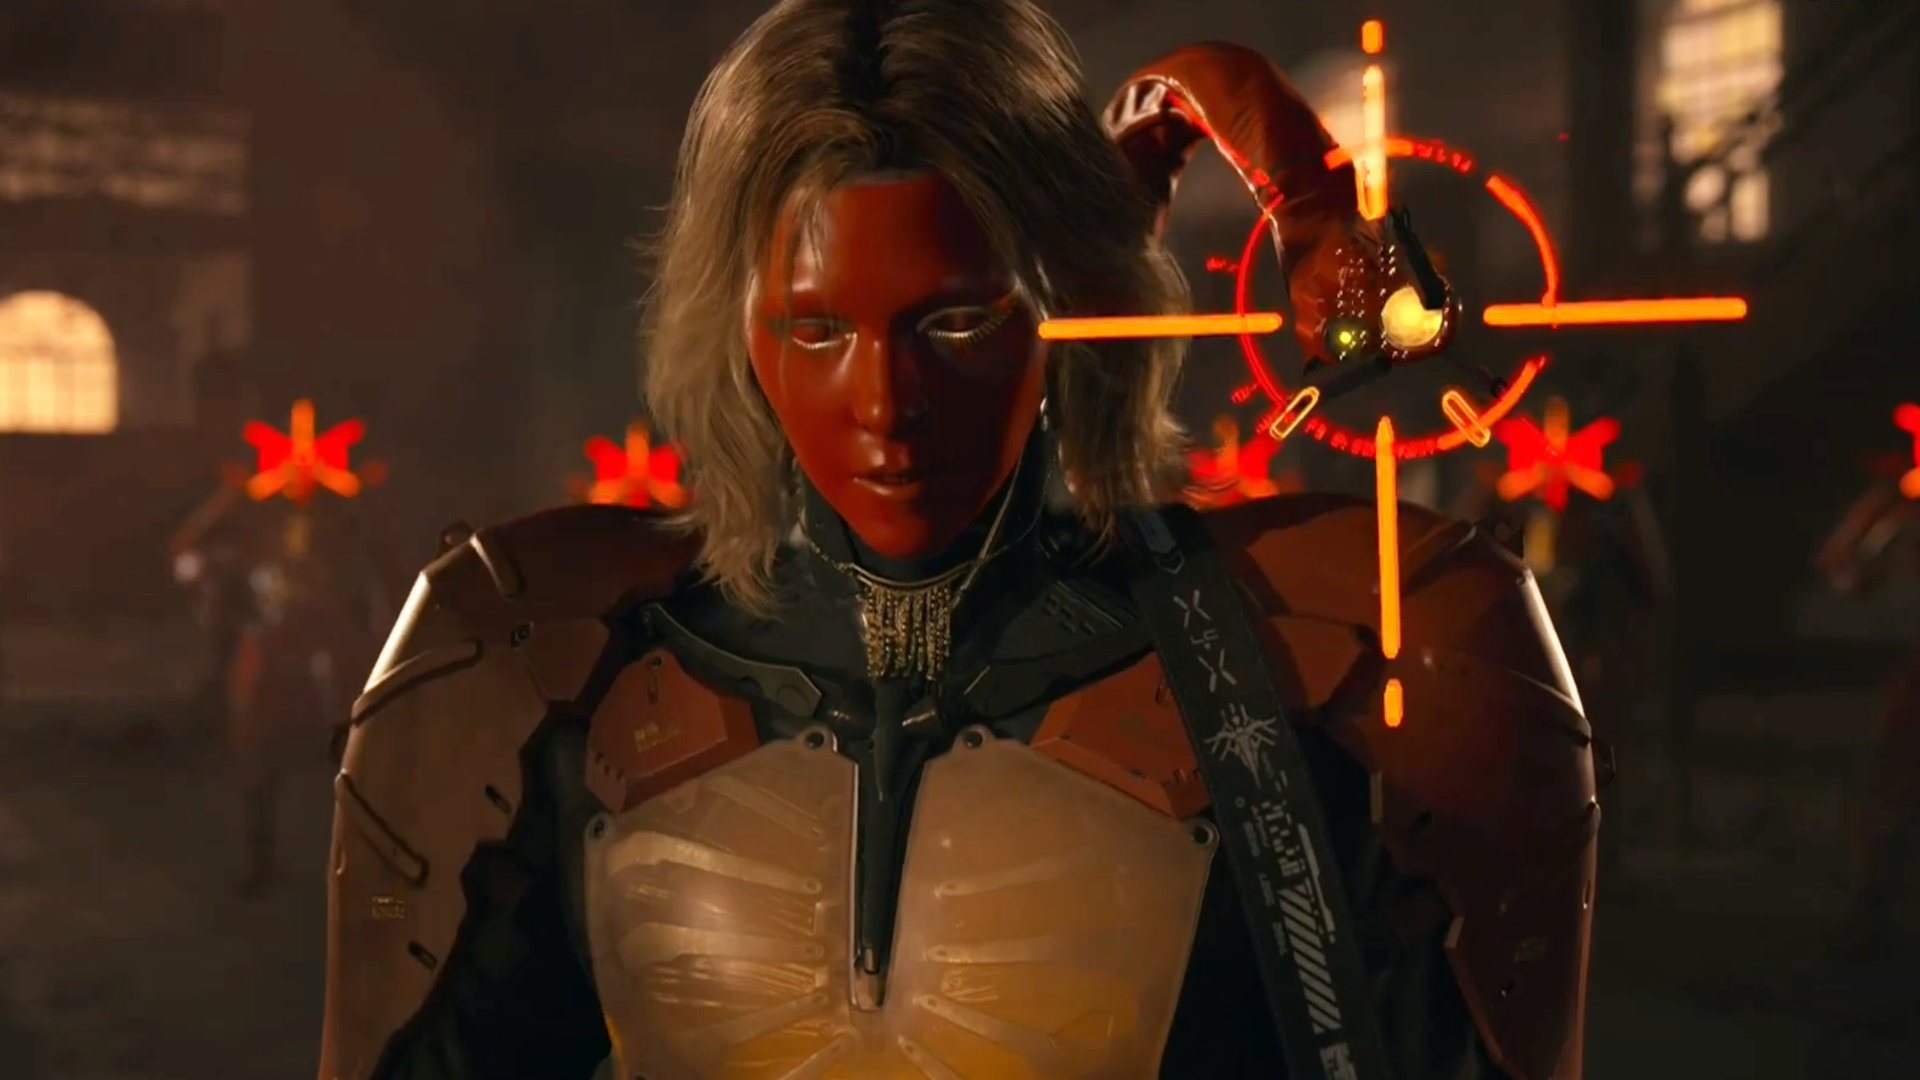 Death Stranding 2 character in a red mask, played by Troy Baker